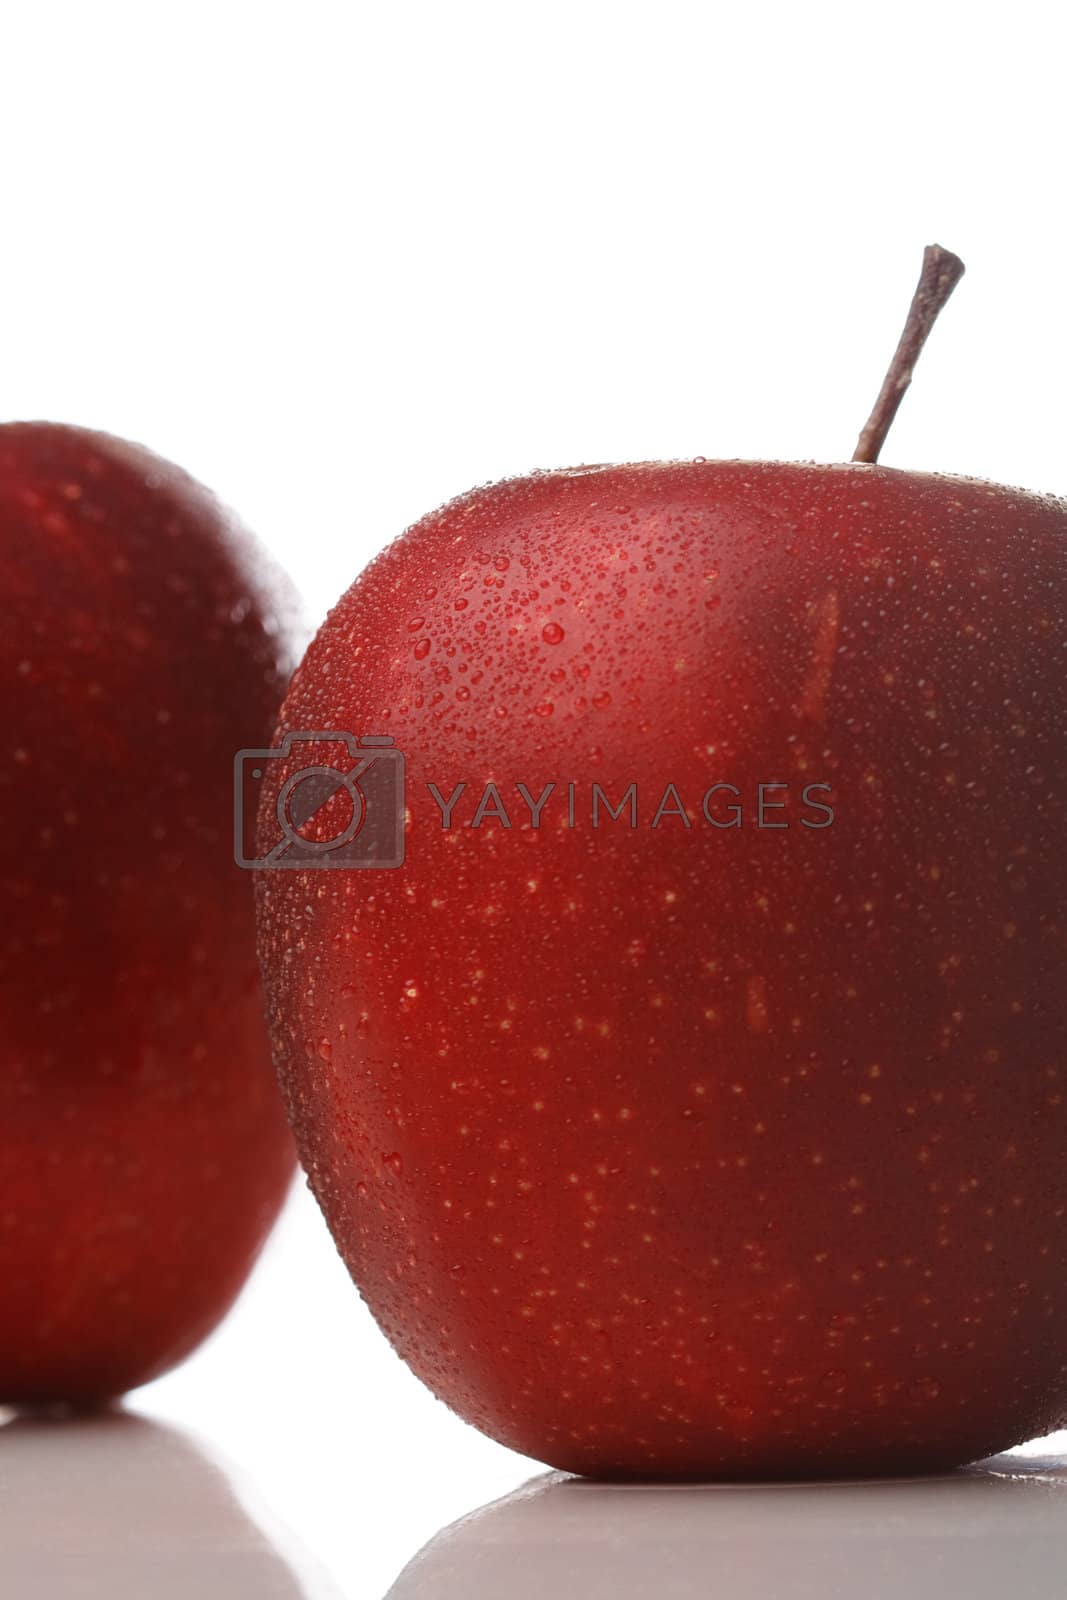 Royalty free image of Waterdrops on an apple by azschach